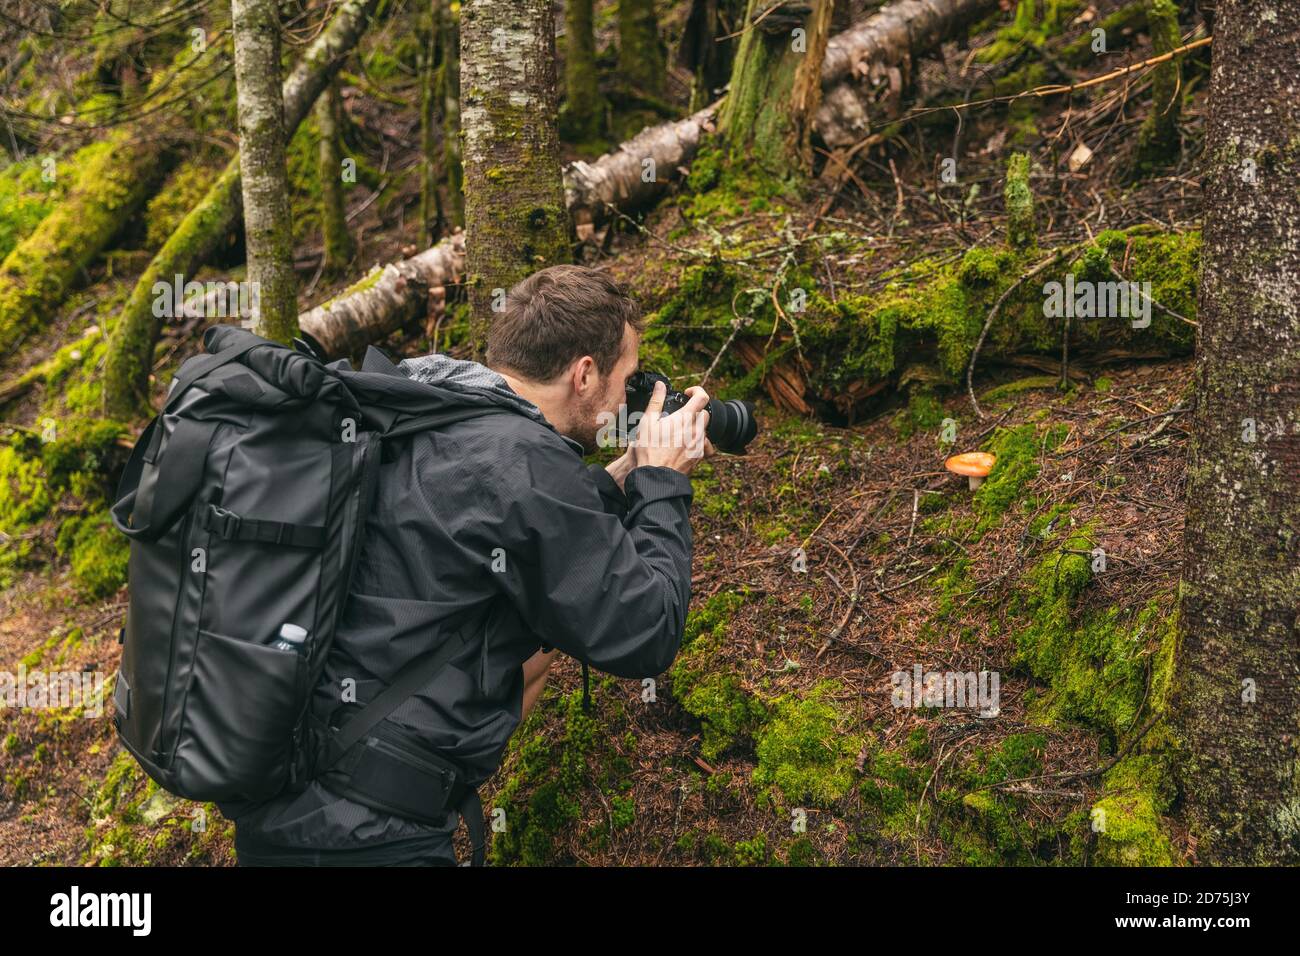 Nature still photography photographer man with professional slr camera taking picture of wild mushroom in forest during trail hike Stock Photo